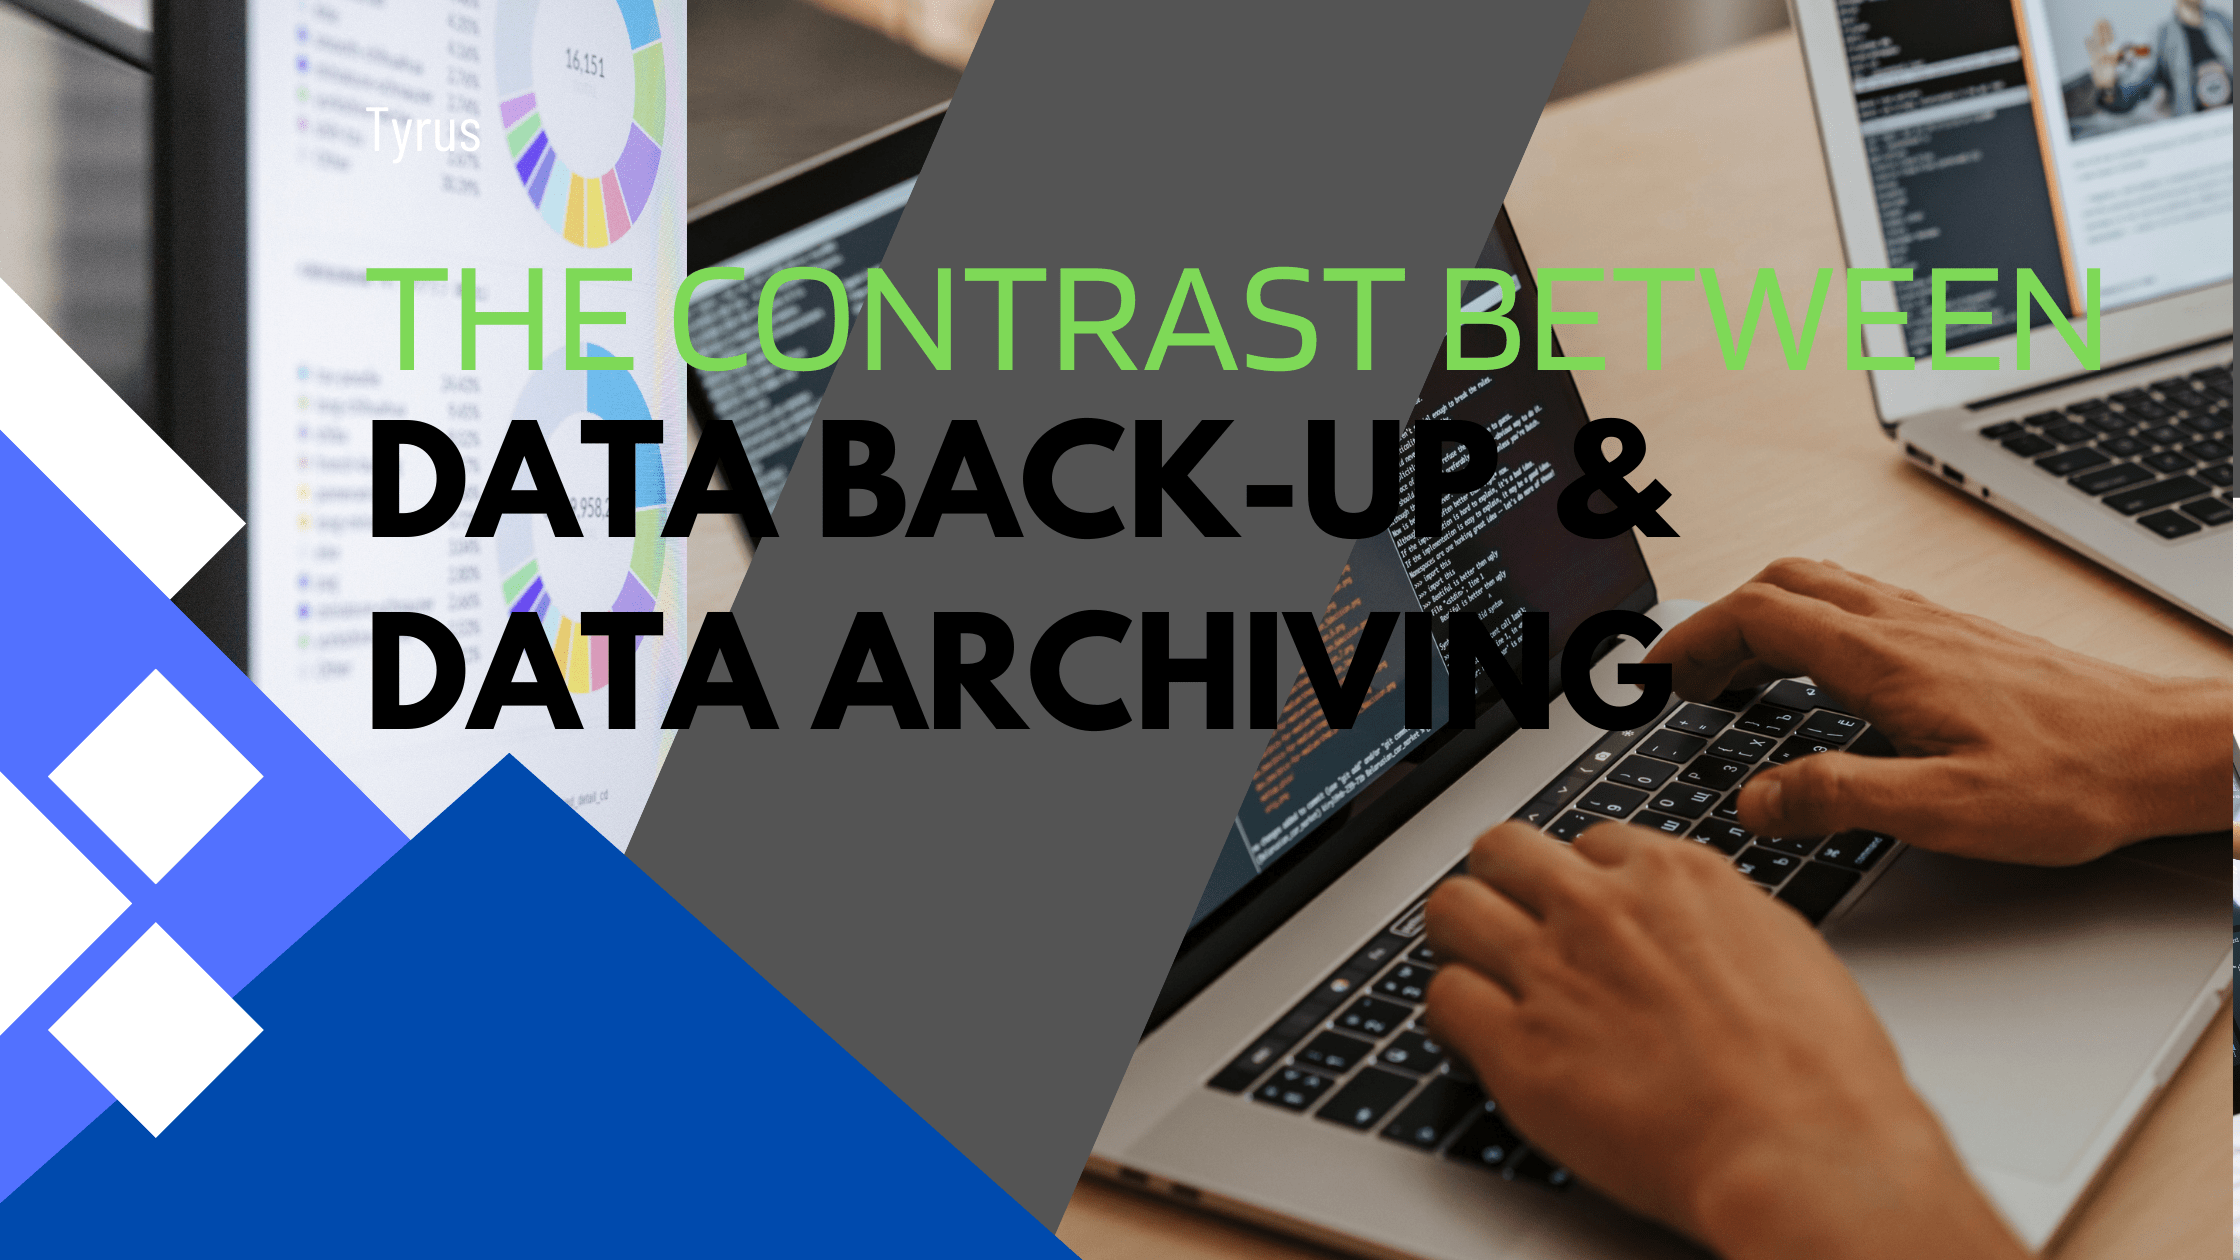 Data Back-Up and Data Archiving